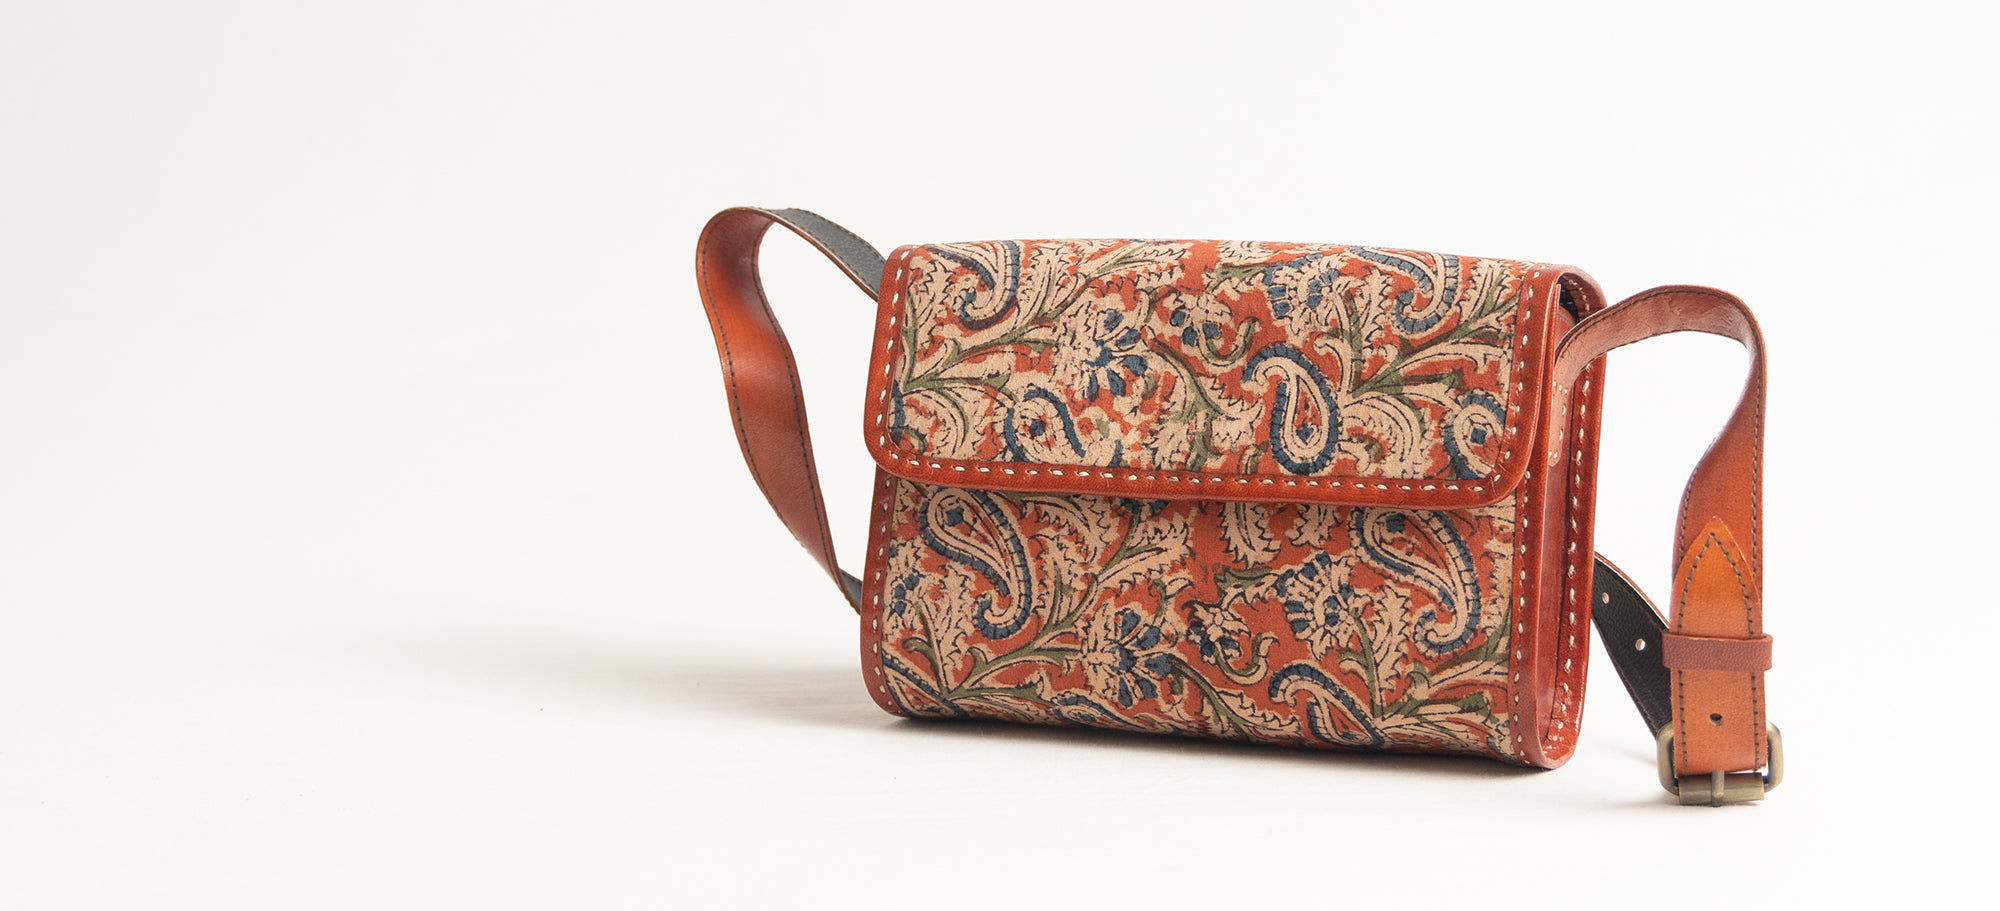 Saran Jute Bags - Kalamkari Jute Lunch Bag, jute bag for carrying lunch box  it or can be carried while going out. Bag has half kalamkari patch on both  sides and a